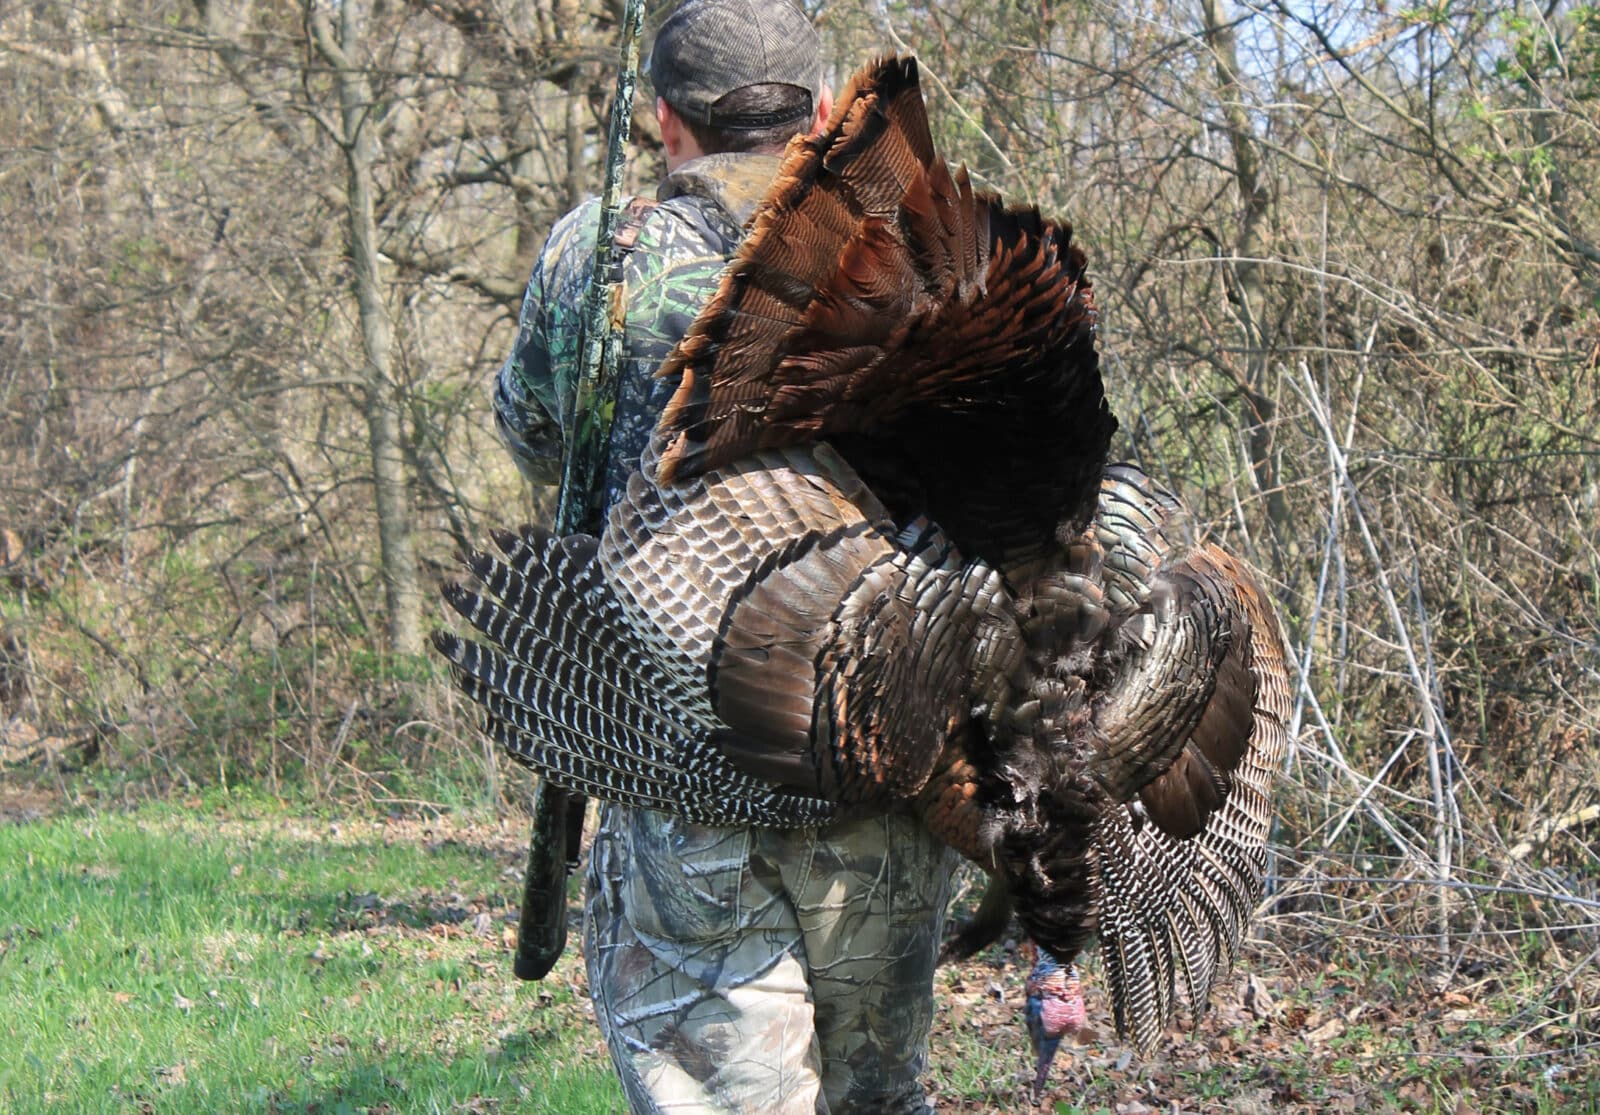 Out of state turkey success